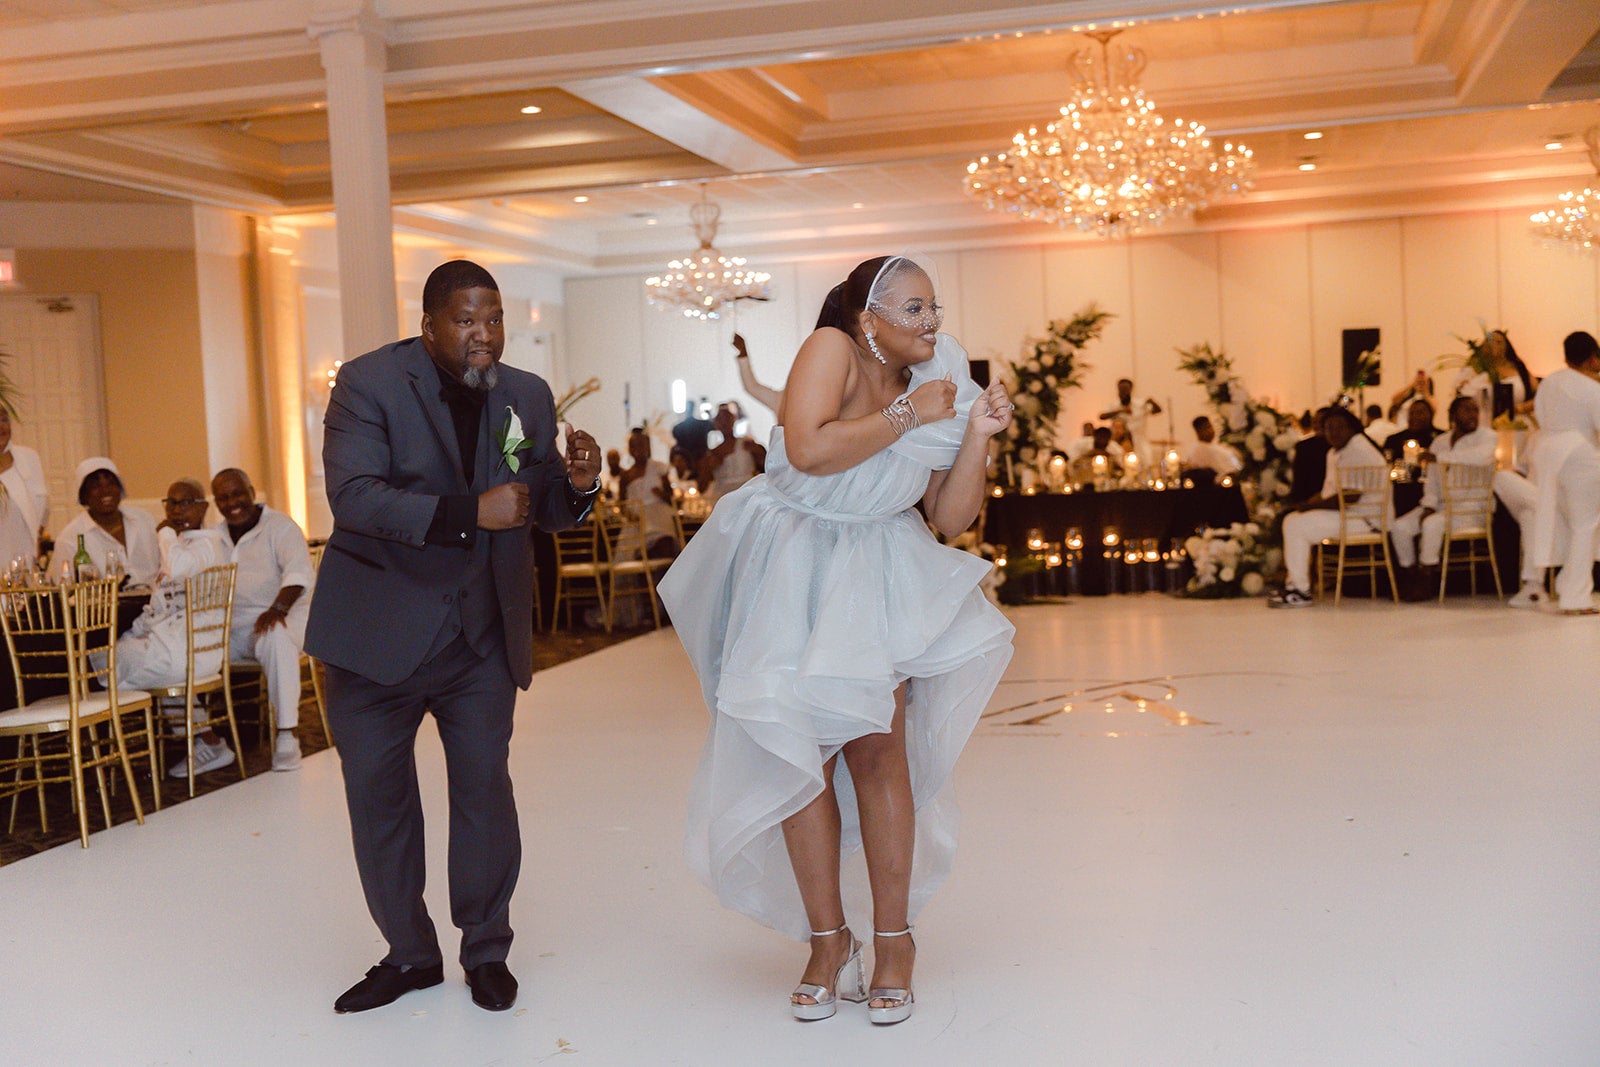 Bridal Bliss: Latasha And Damion Celebrated 25 Years Of Marriage With A Vow Renewal In Chicago - And The South Of France